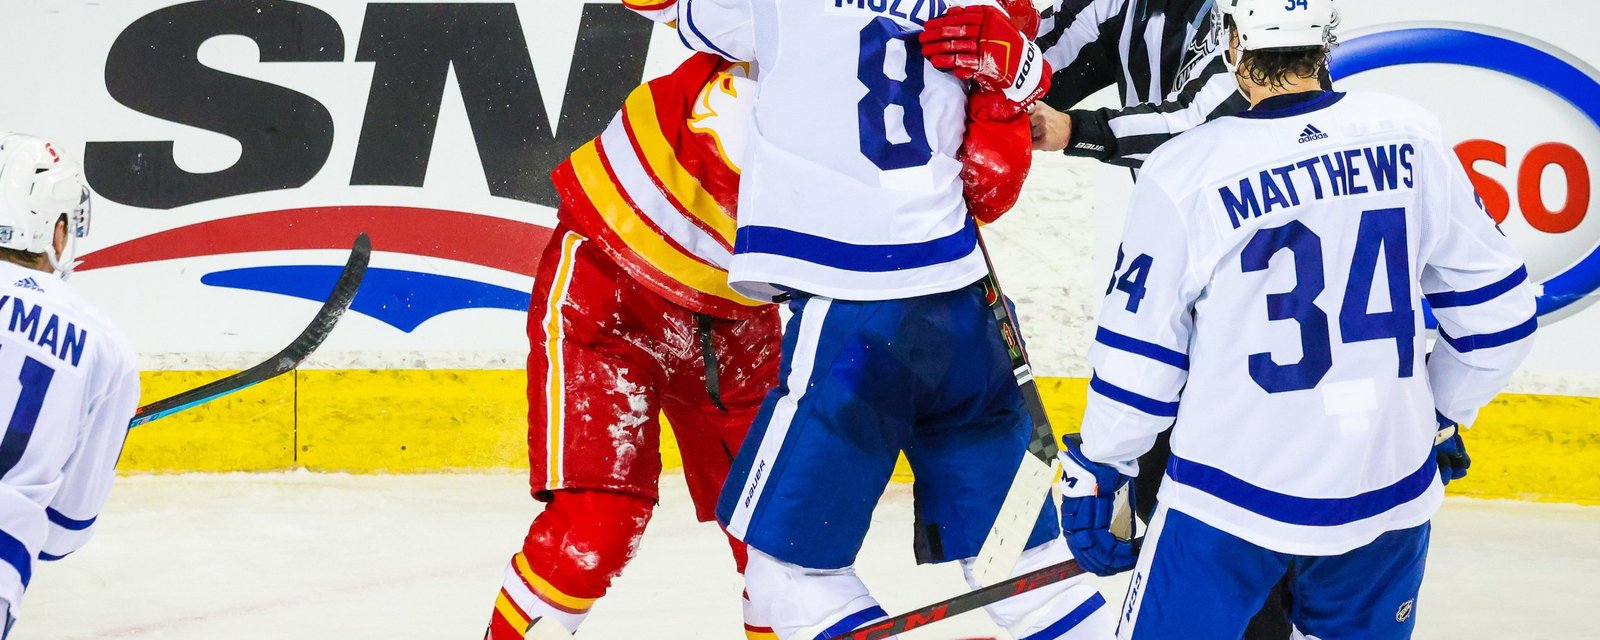 We finally know the real reason why Tkachuk threw a fit after loss to the Maple Leafs last week 